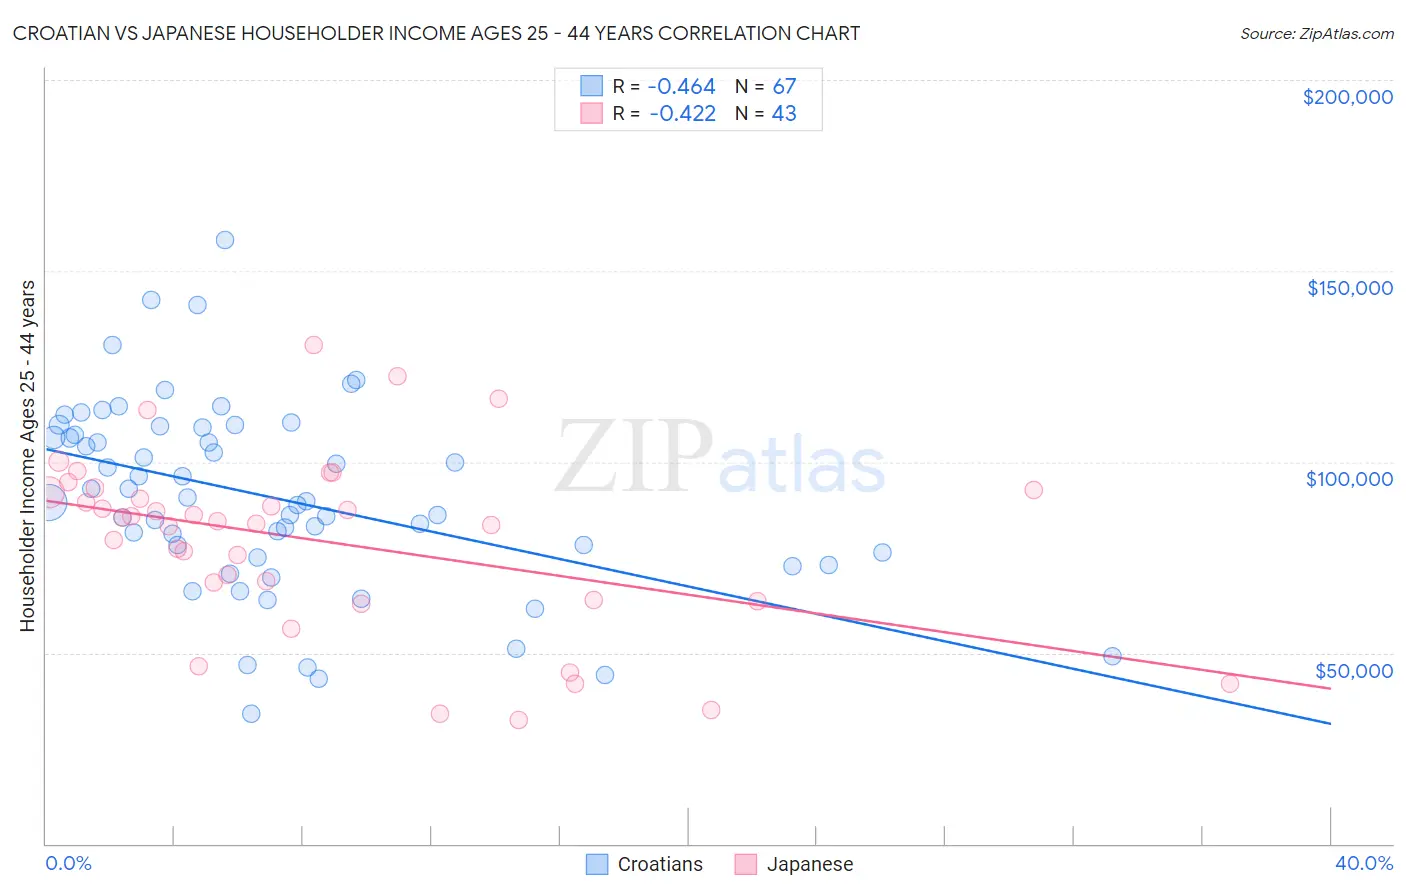 Croatian vs Japanese Householder Income Ages 25 - 44 years